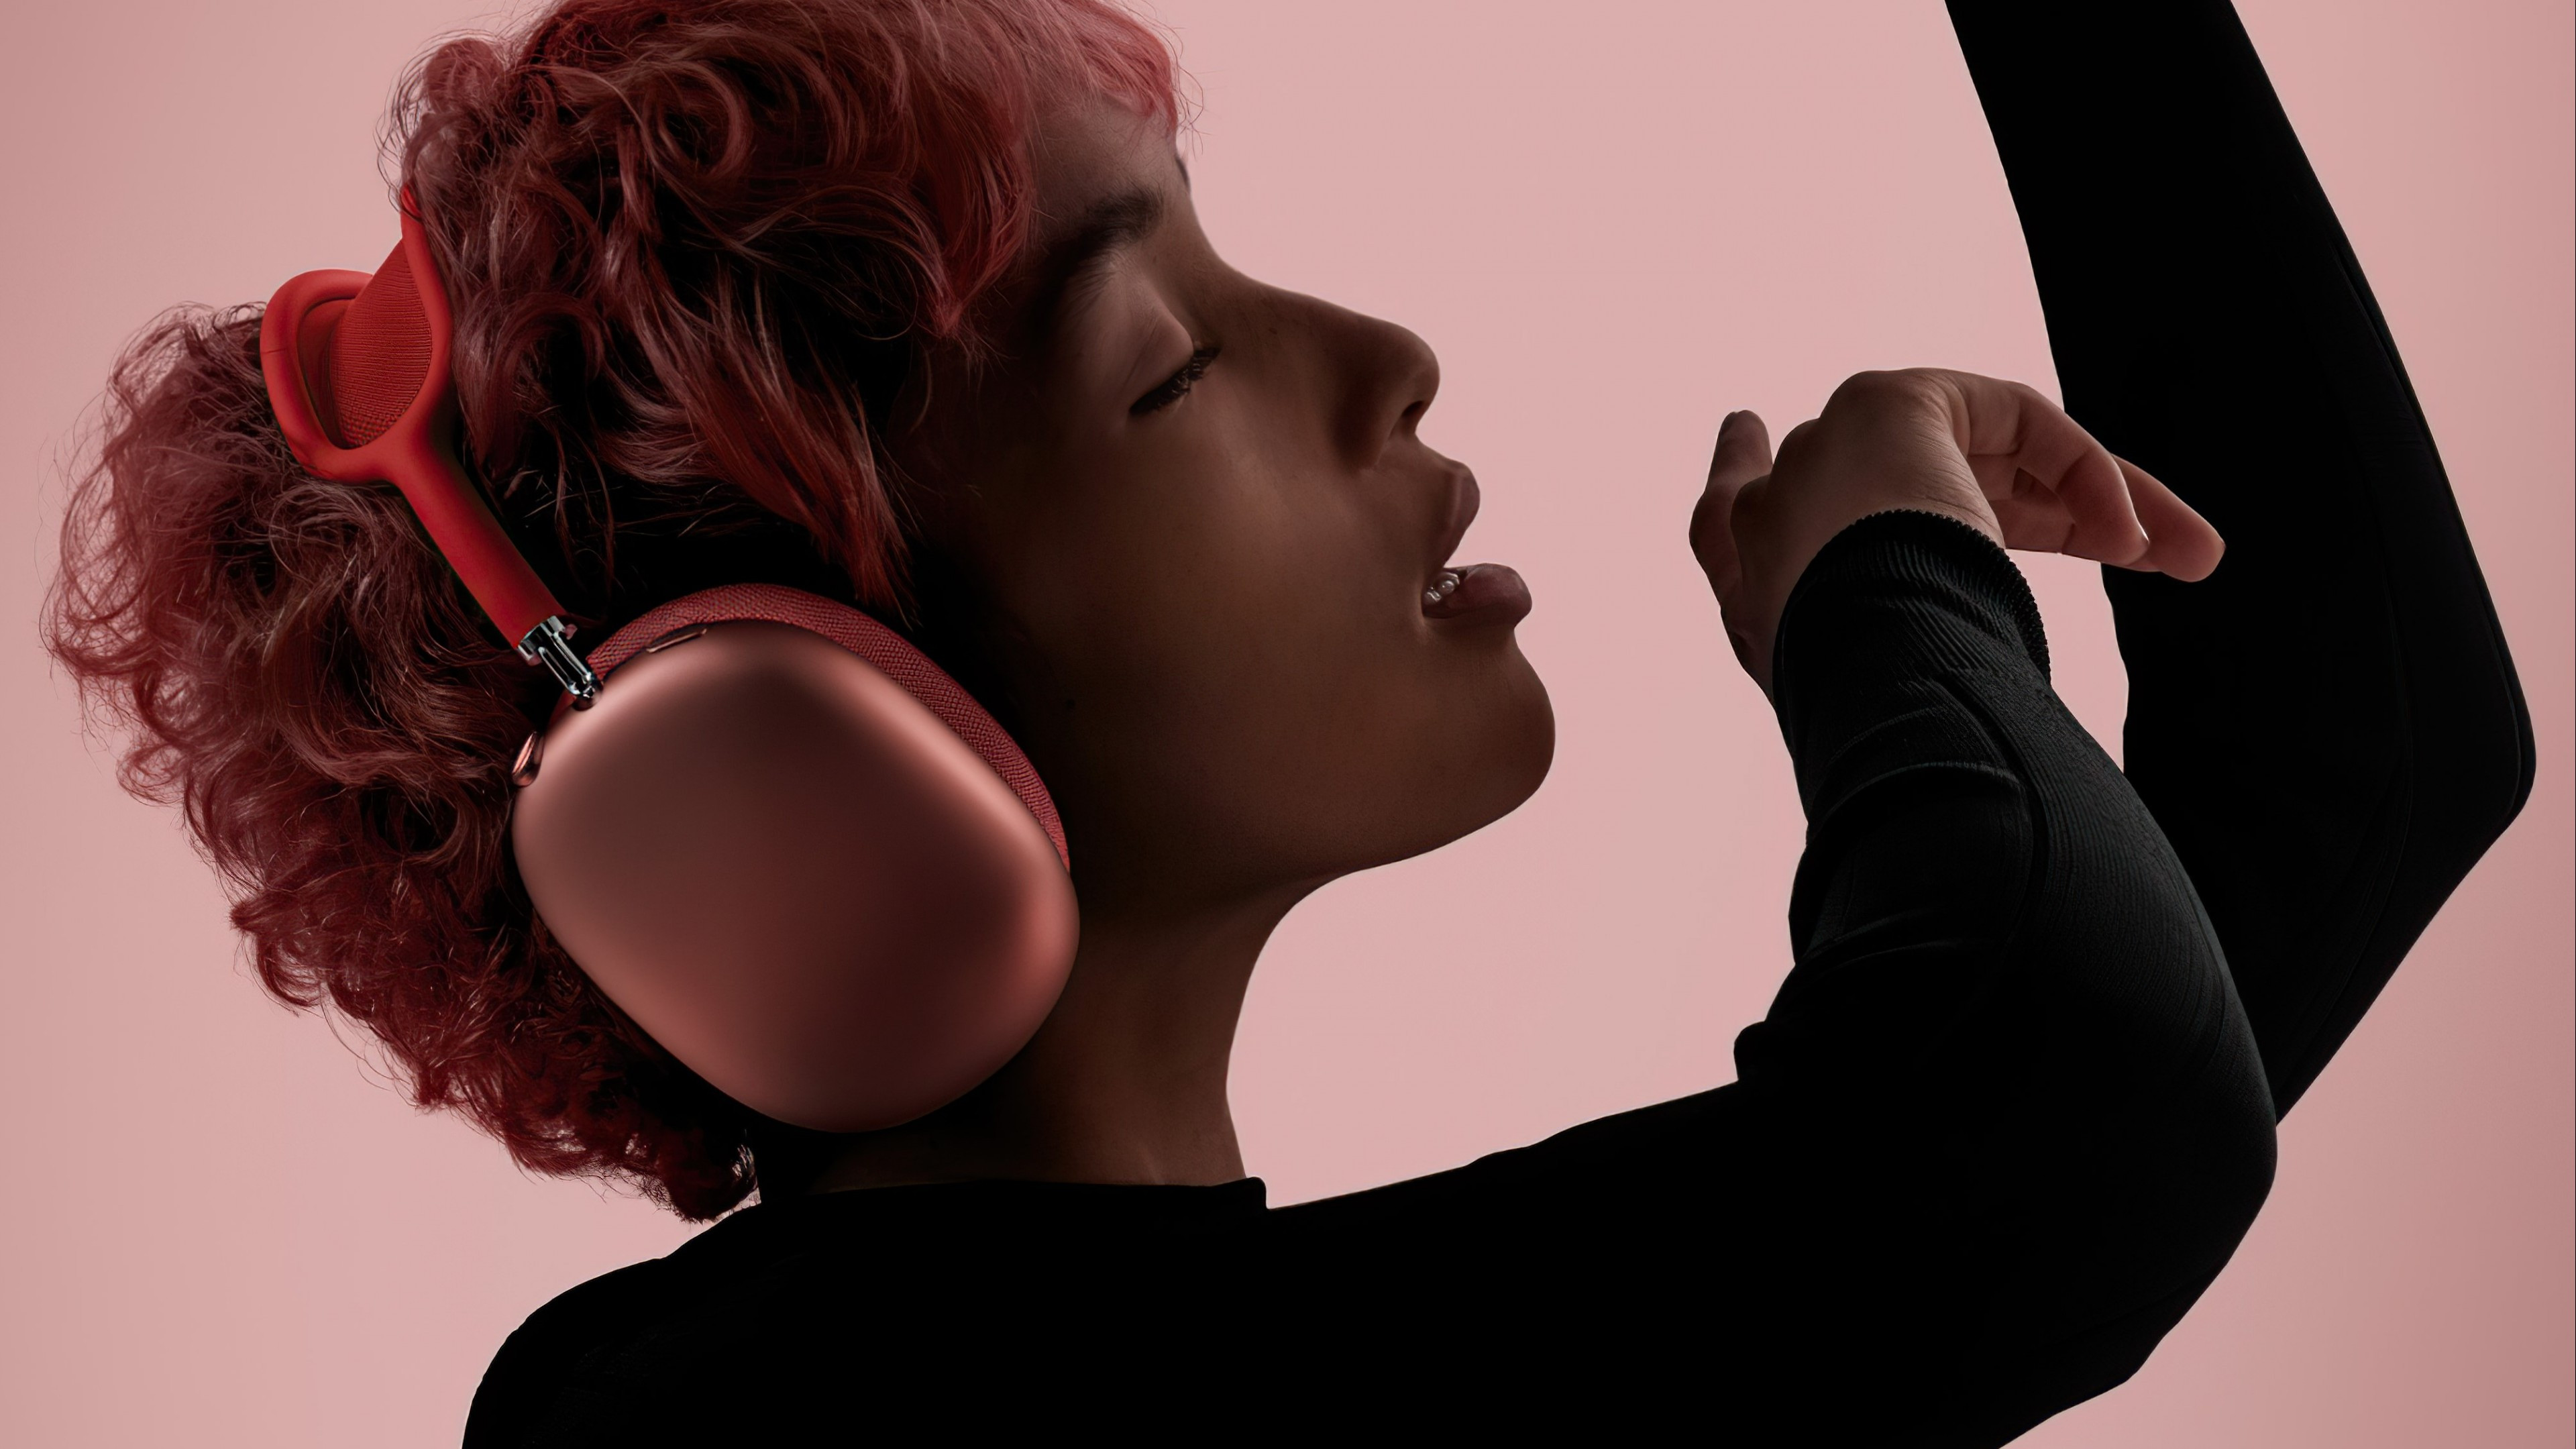 Lady with AirPods Max wallpaper 3840x2160